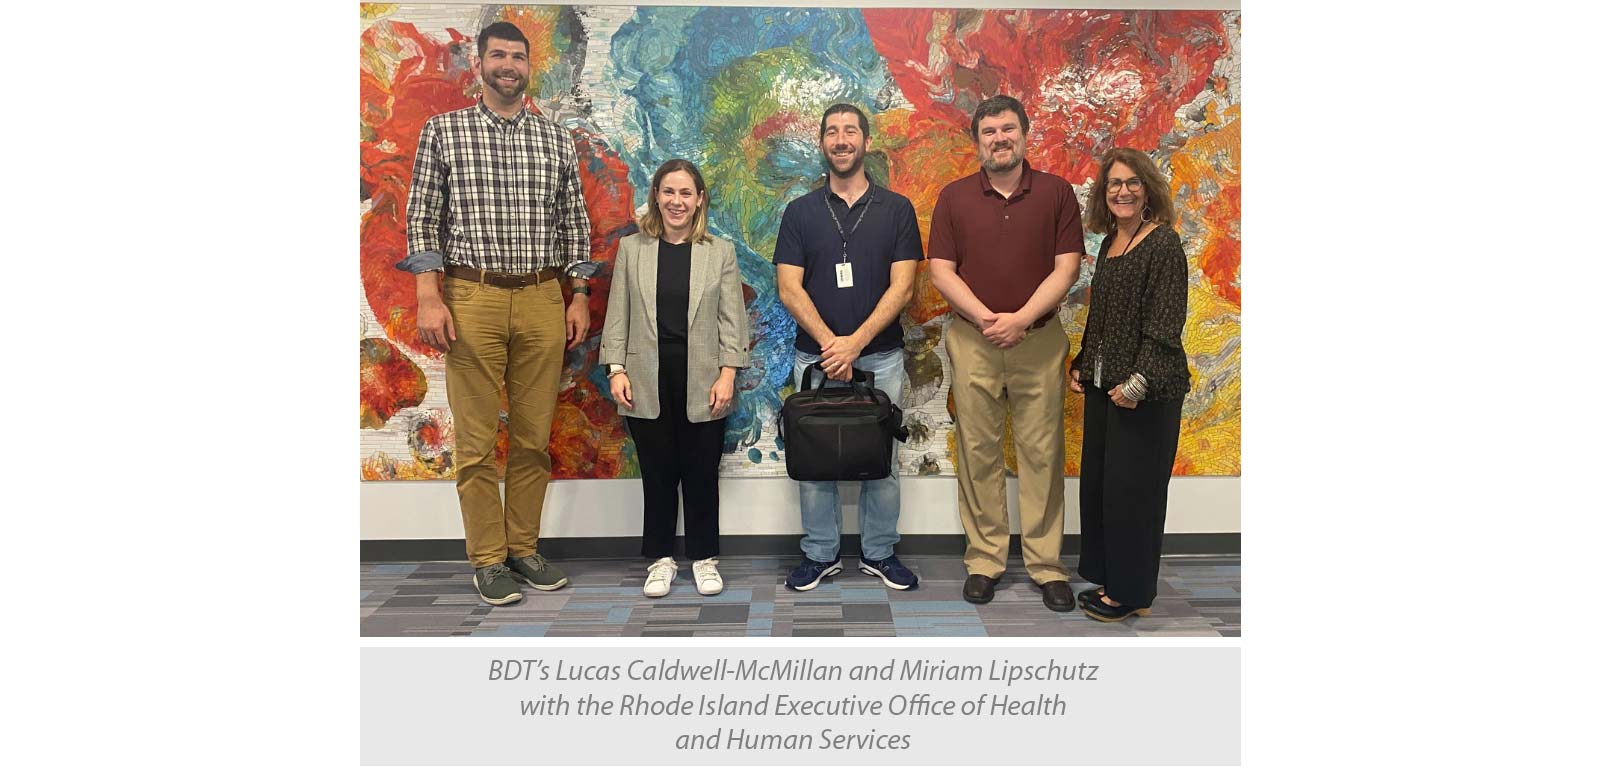 BDT's Lucas Caldwell-McMillan and Miriam Lipschutz with the Rhode Island Executive Office of Health and Human Services